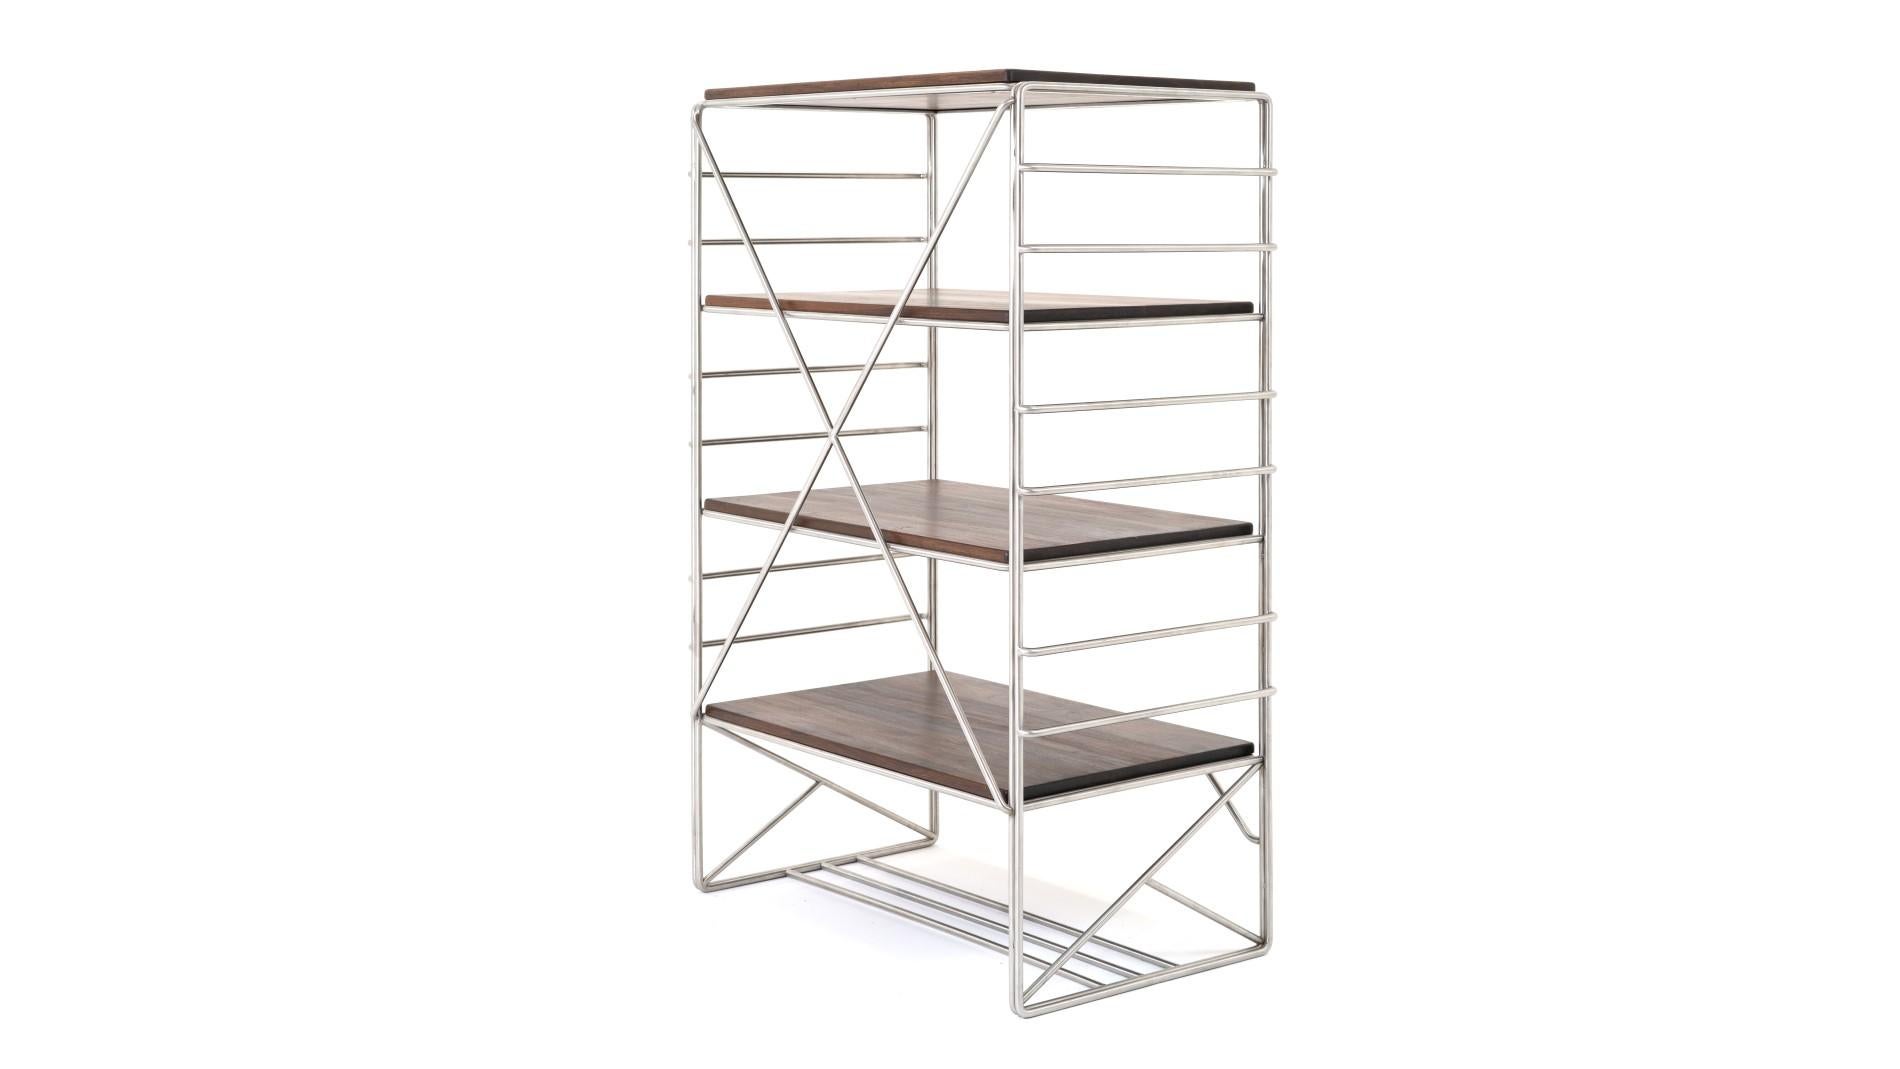 Lebanese Wired Shelf, Solid Freestanding Display and Storage, in Stainless Steel, Walnut For Sale